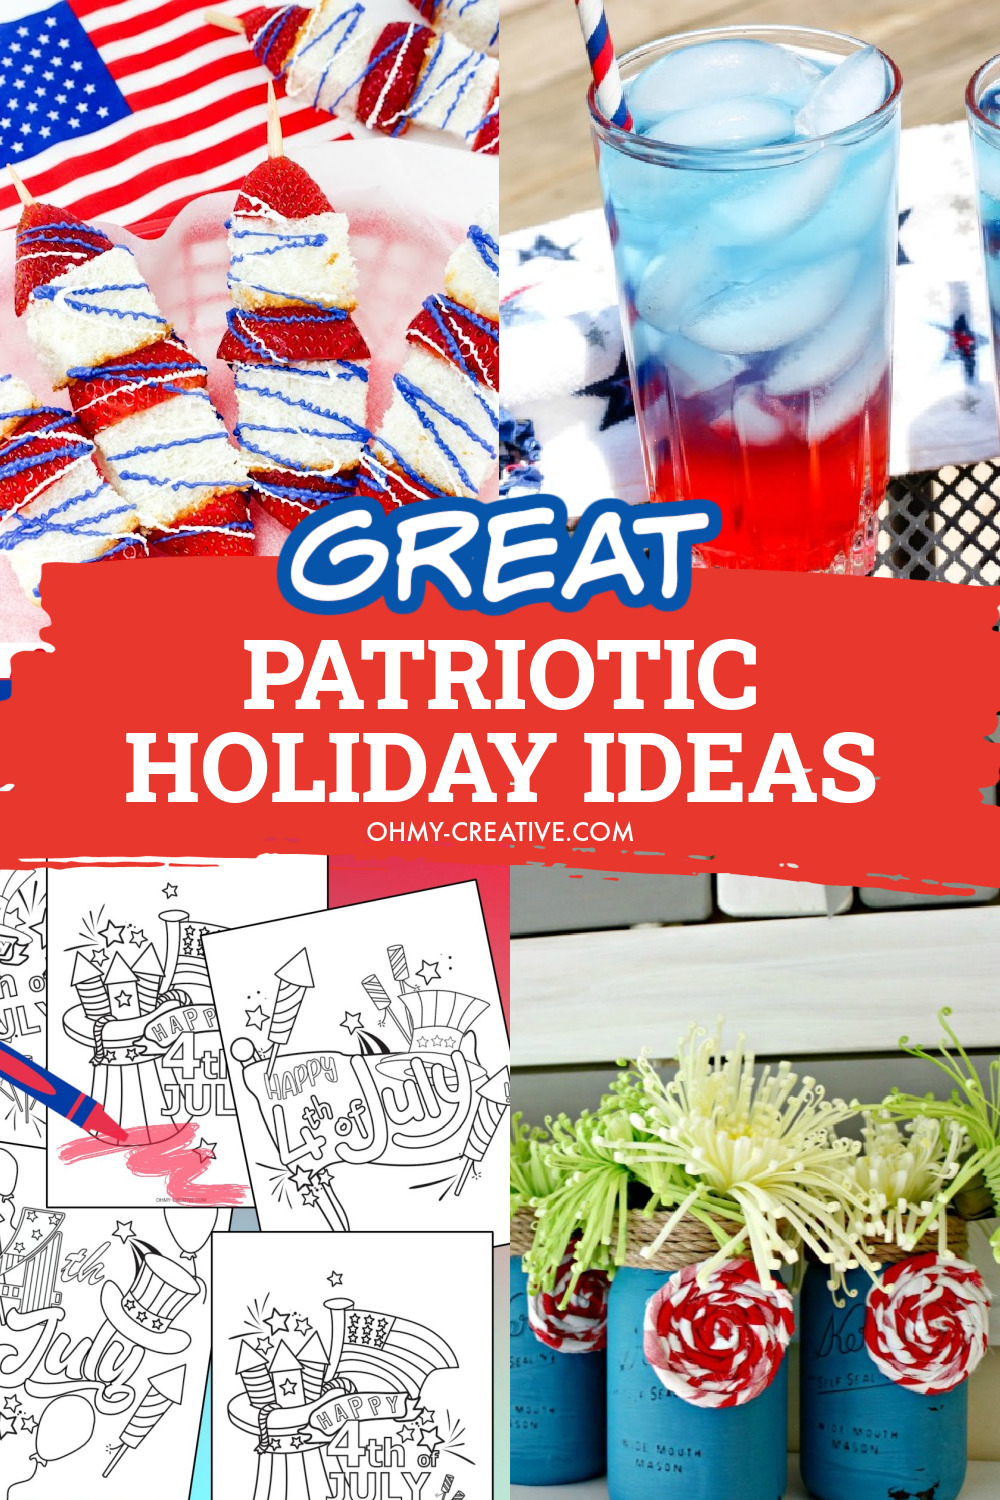 A collage of patriotic holiday ideas in red, white and blue.